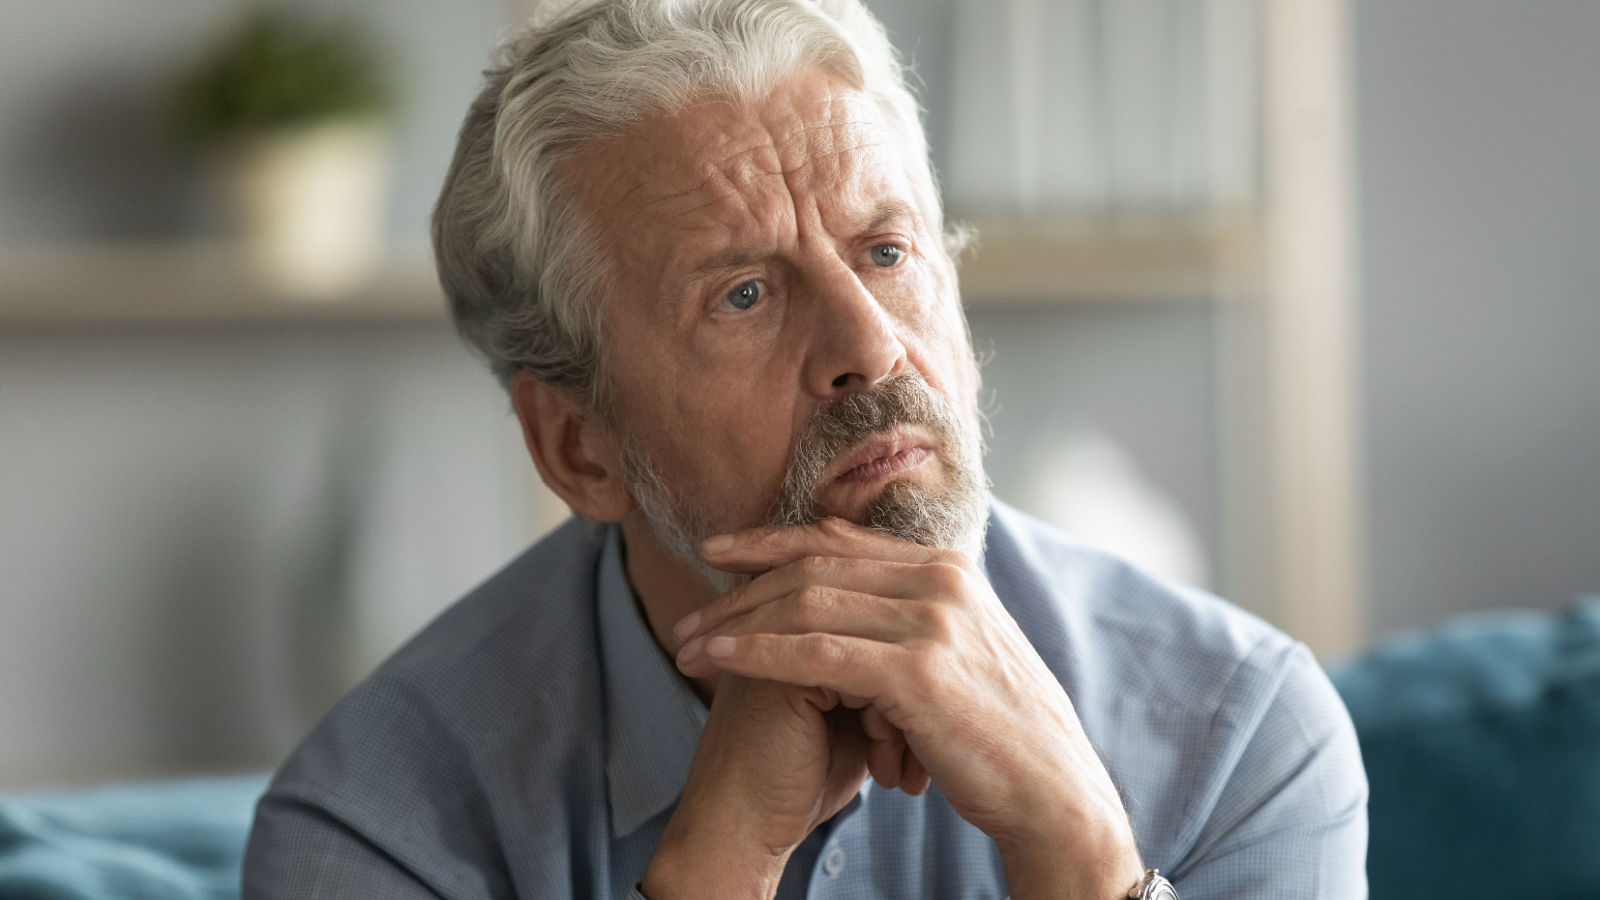 image credit: fizkes/shutterstock <p>Society has taught men to keep their emotions to themselves, but many men report feeling more emotional as they age, including a greater tendency to express feelings or cry. It’s a natural part of emotional maturation and can lead to deeper connections.</p>